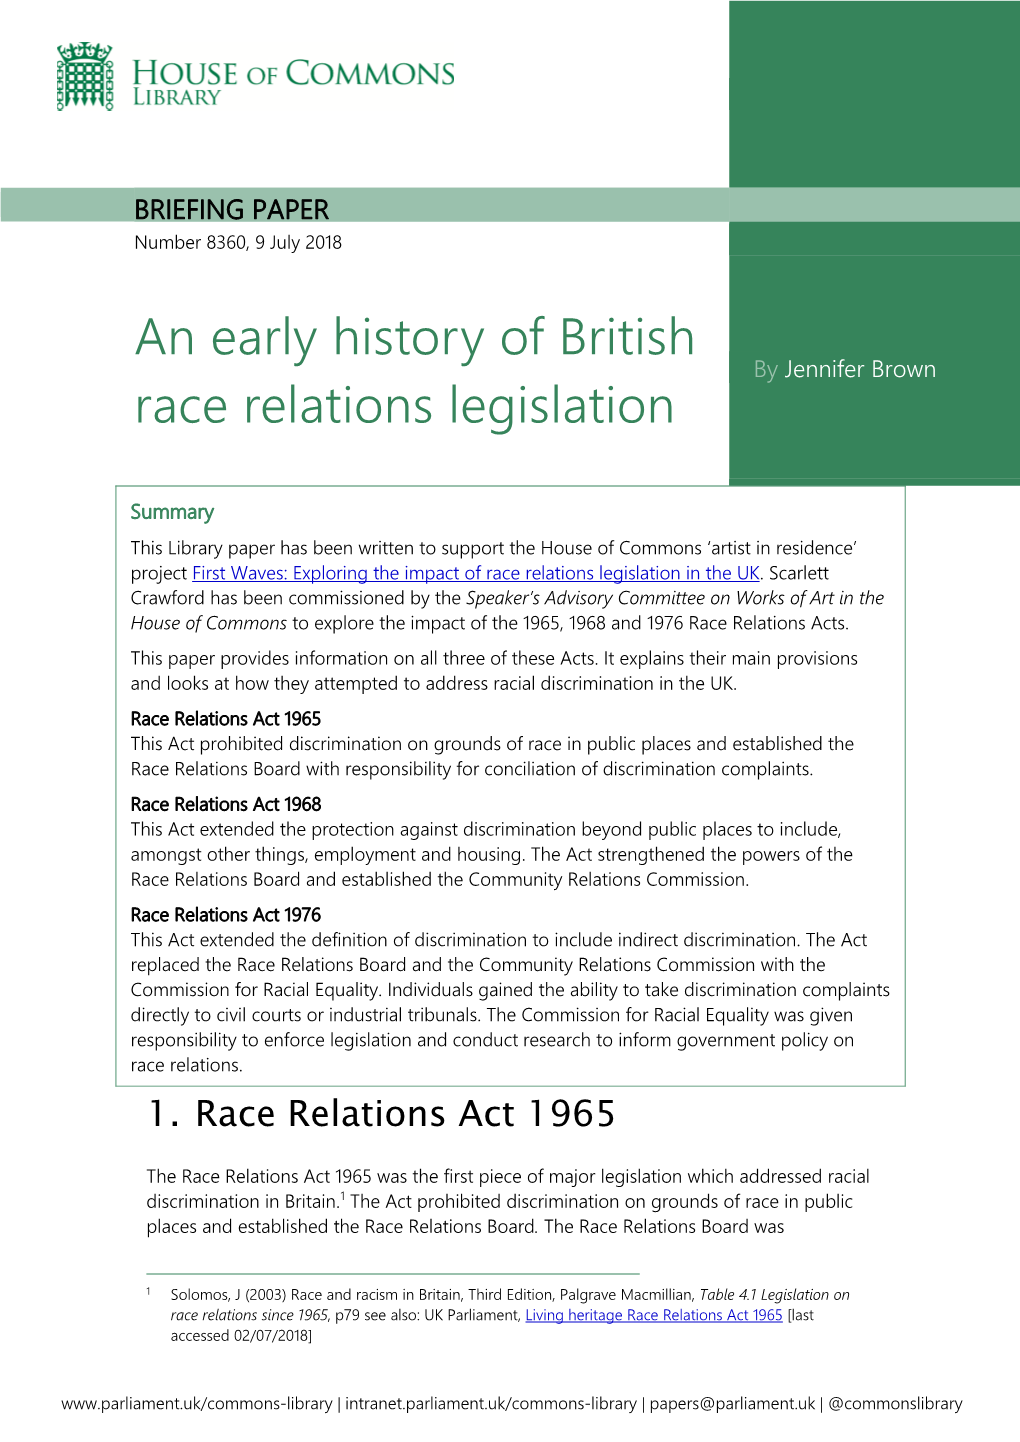 An Early History of British Race Relations Legislation